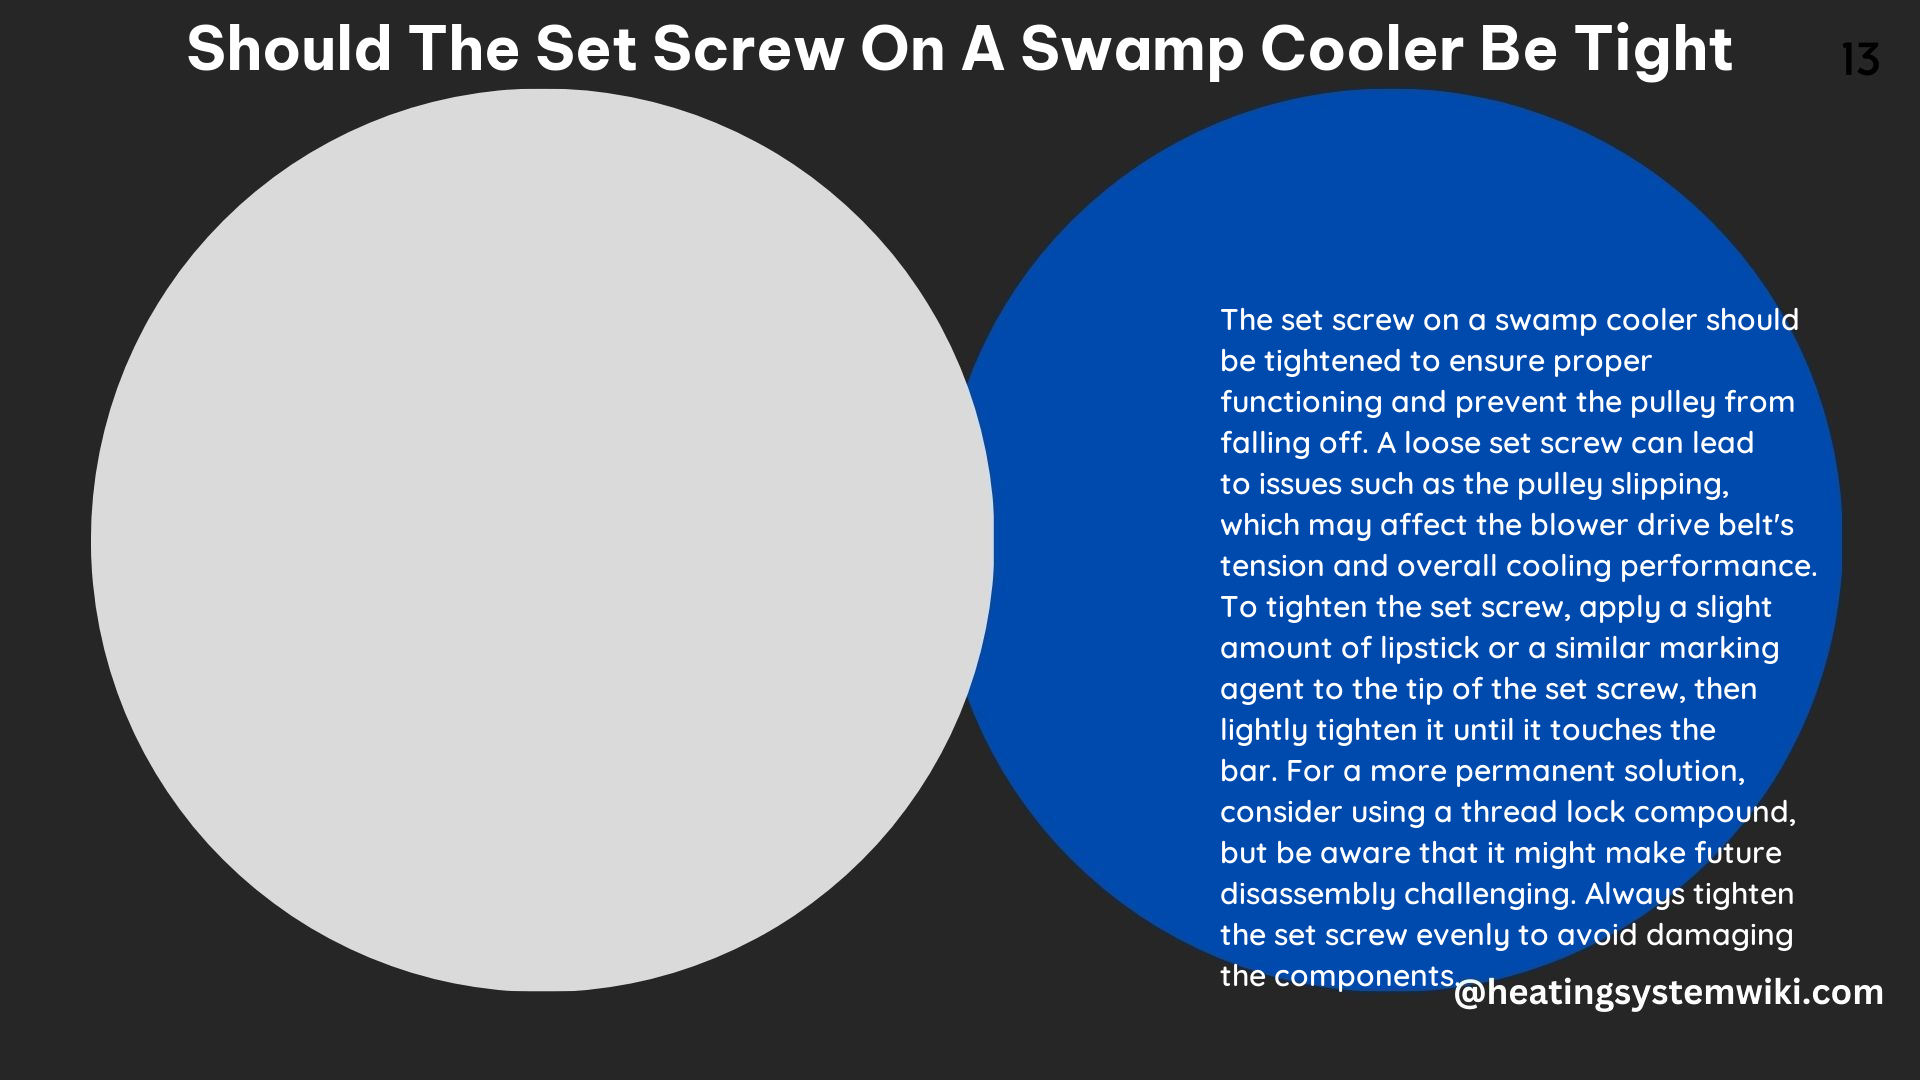 Tight or Loose? The Ideal Set Screw for Swamp Coolers ...